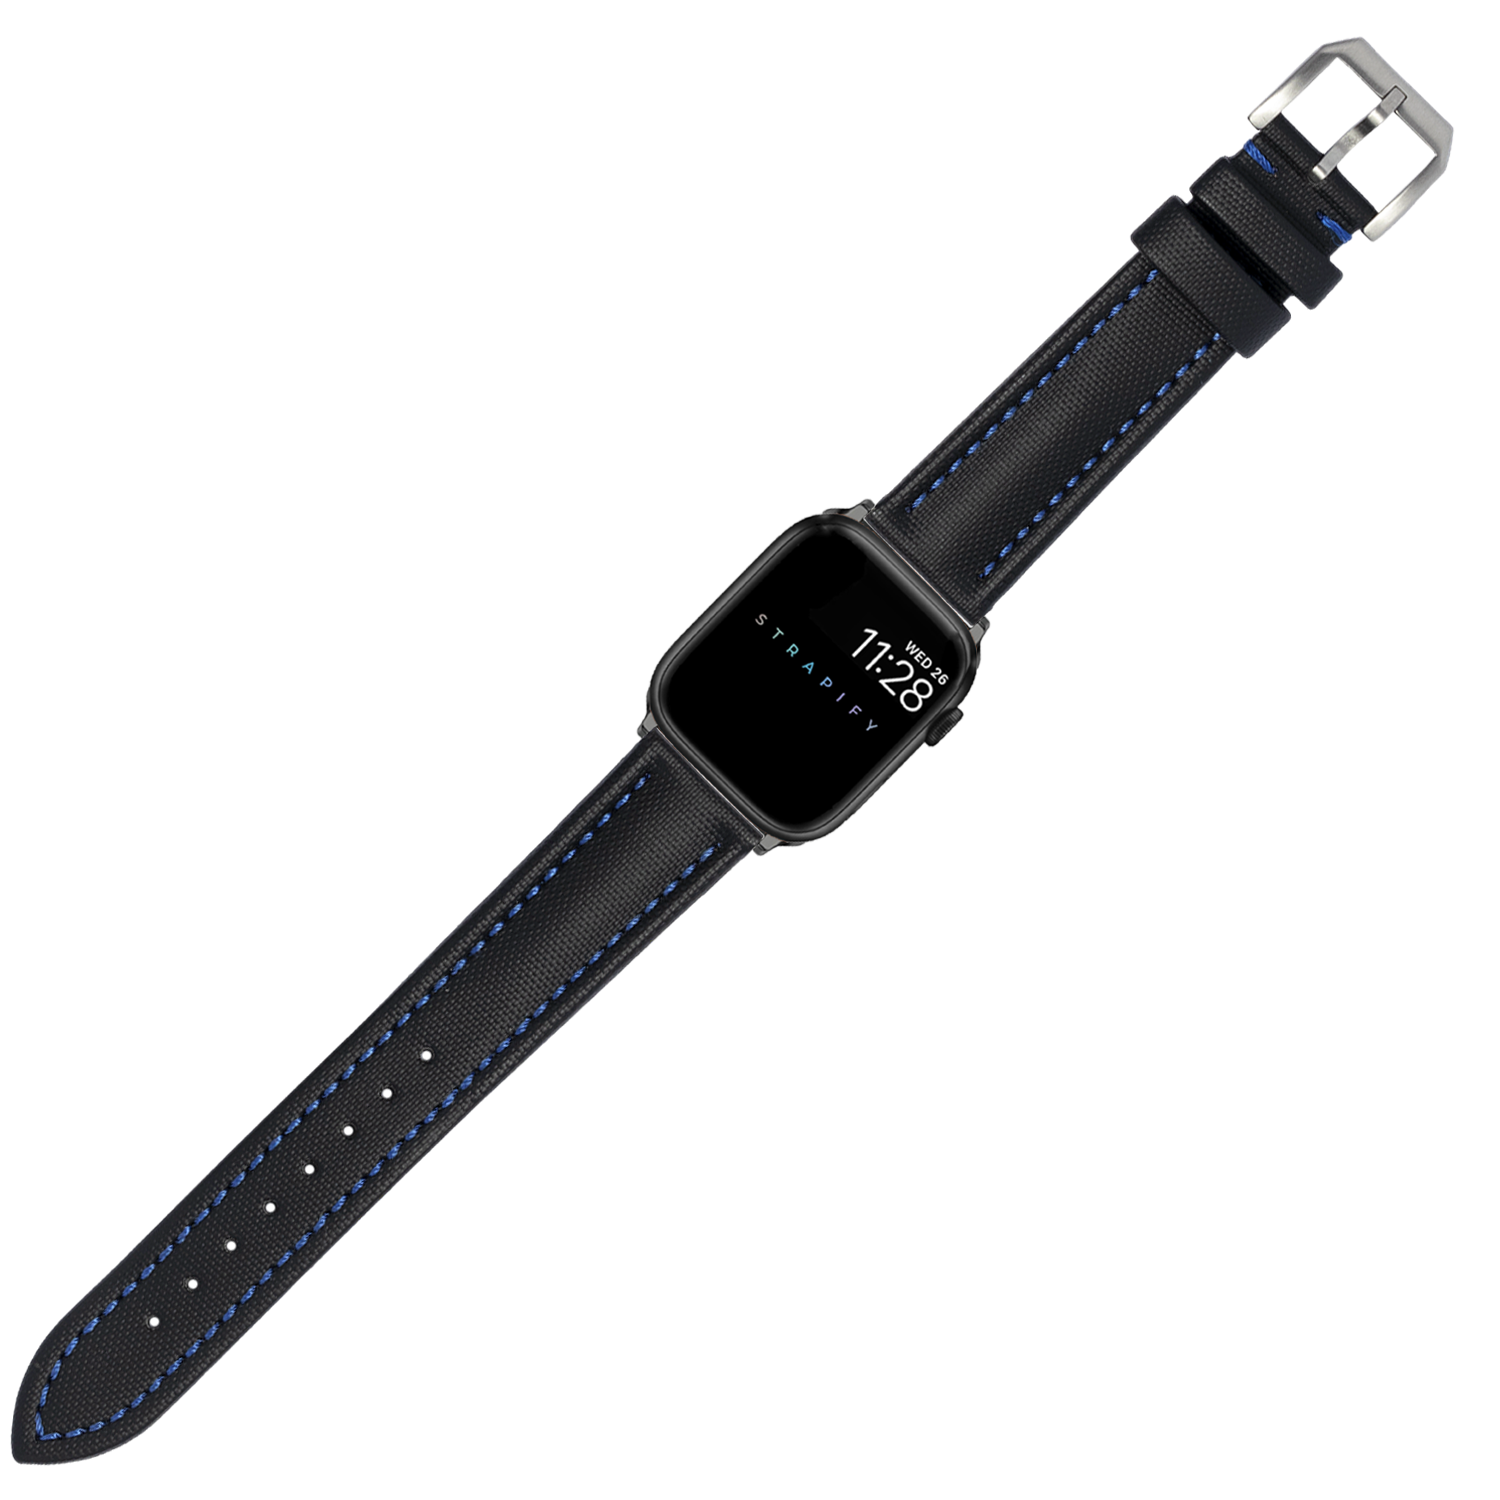 [Apple Watch] King Sailcloth - Black with Navy Blue Stitching